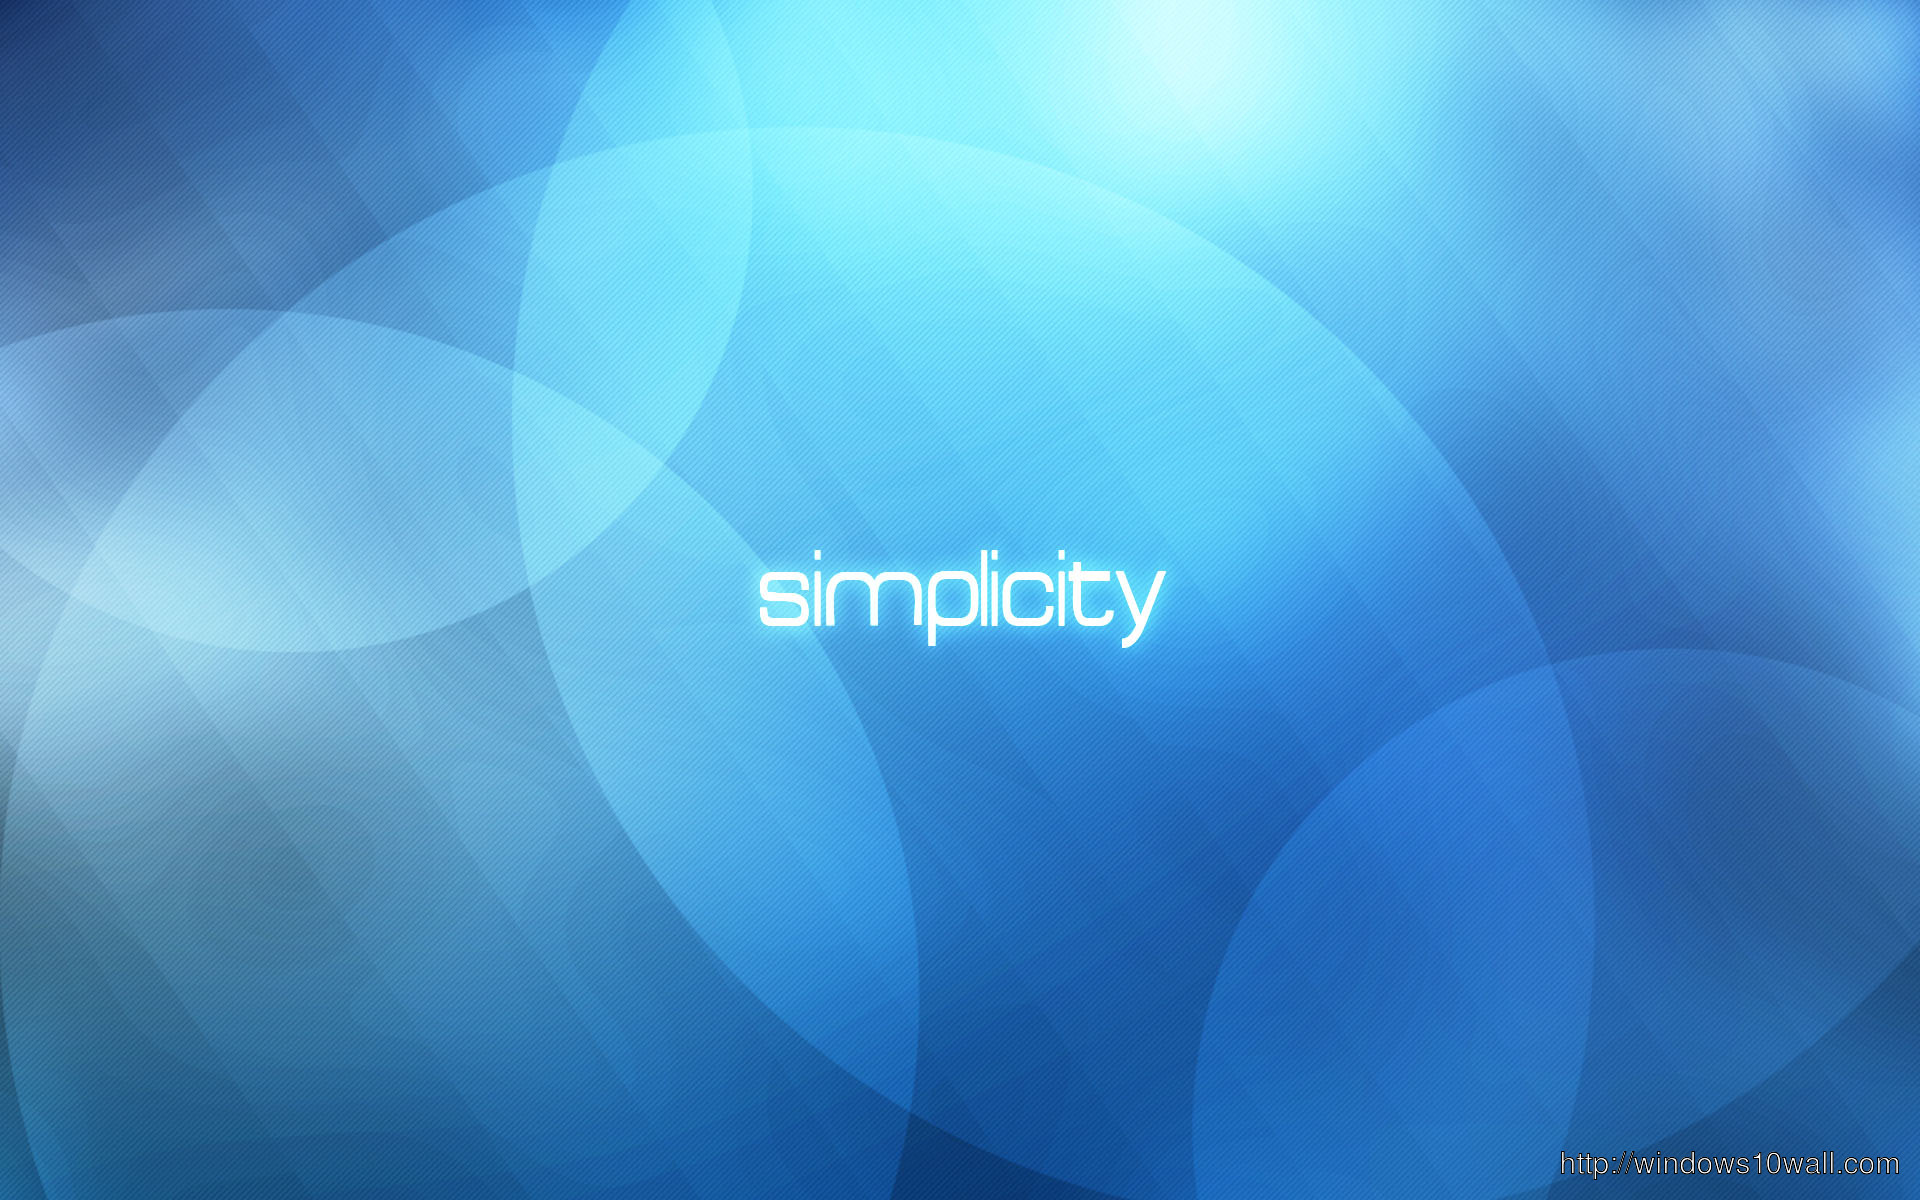 Simplicity Background Wallpaper